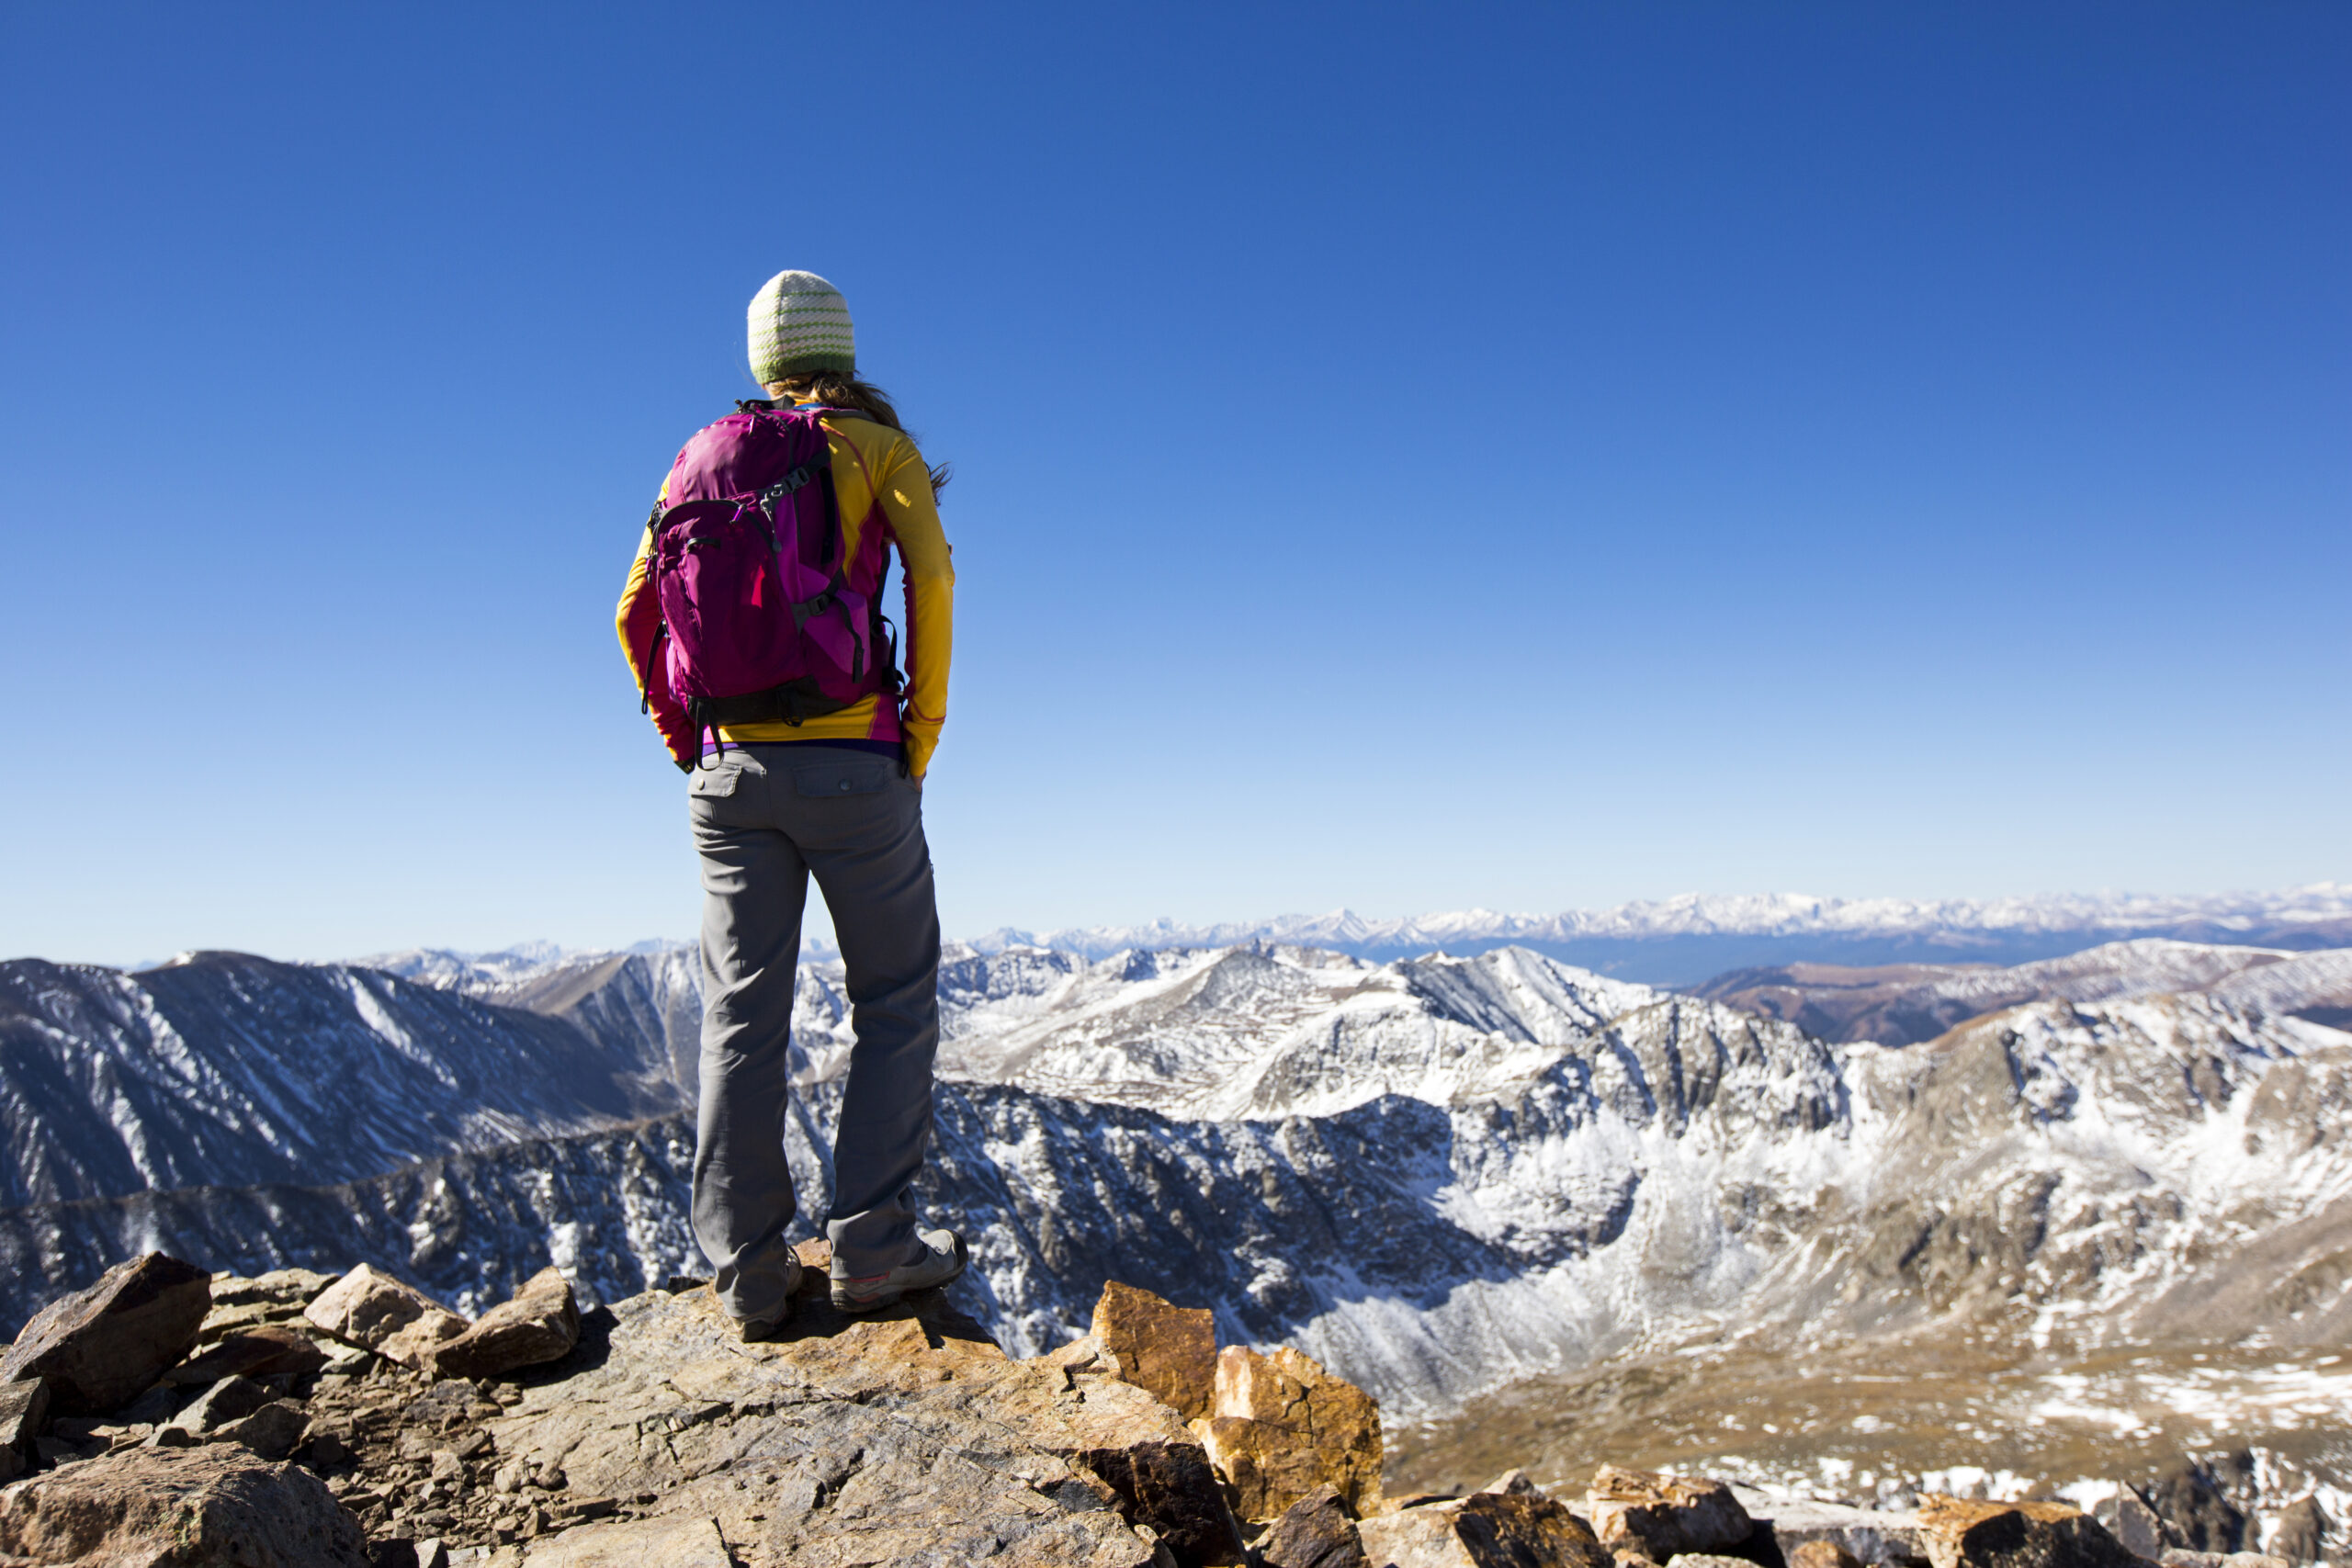 A young woman hiking on top of a 14,000 ft peak near Breckenridge, Colorado.